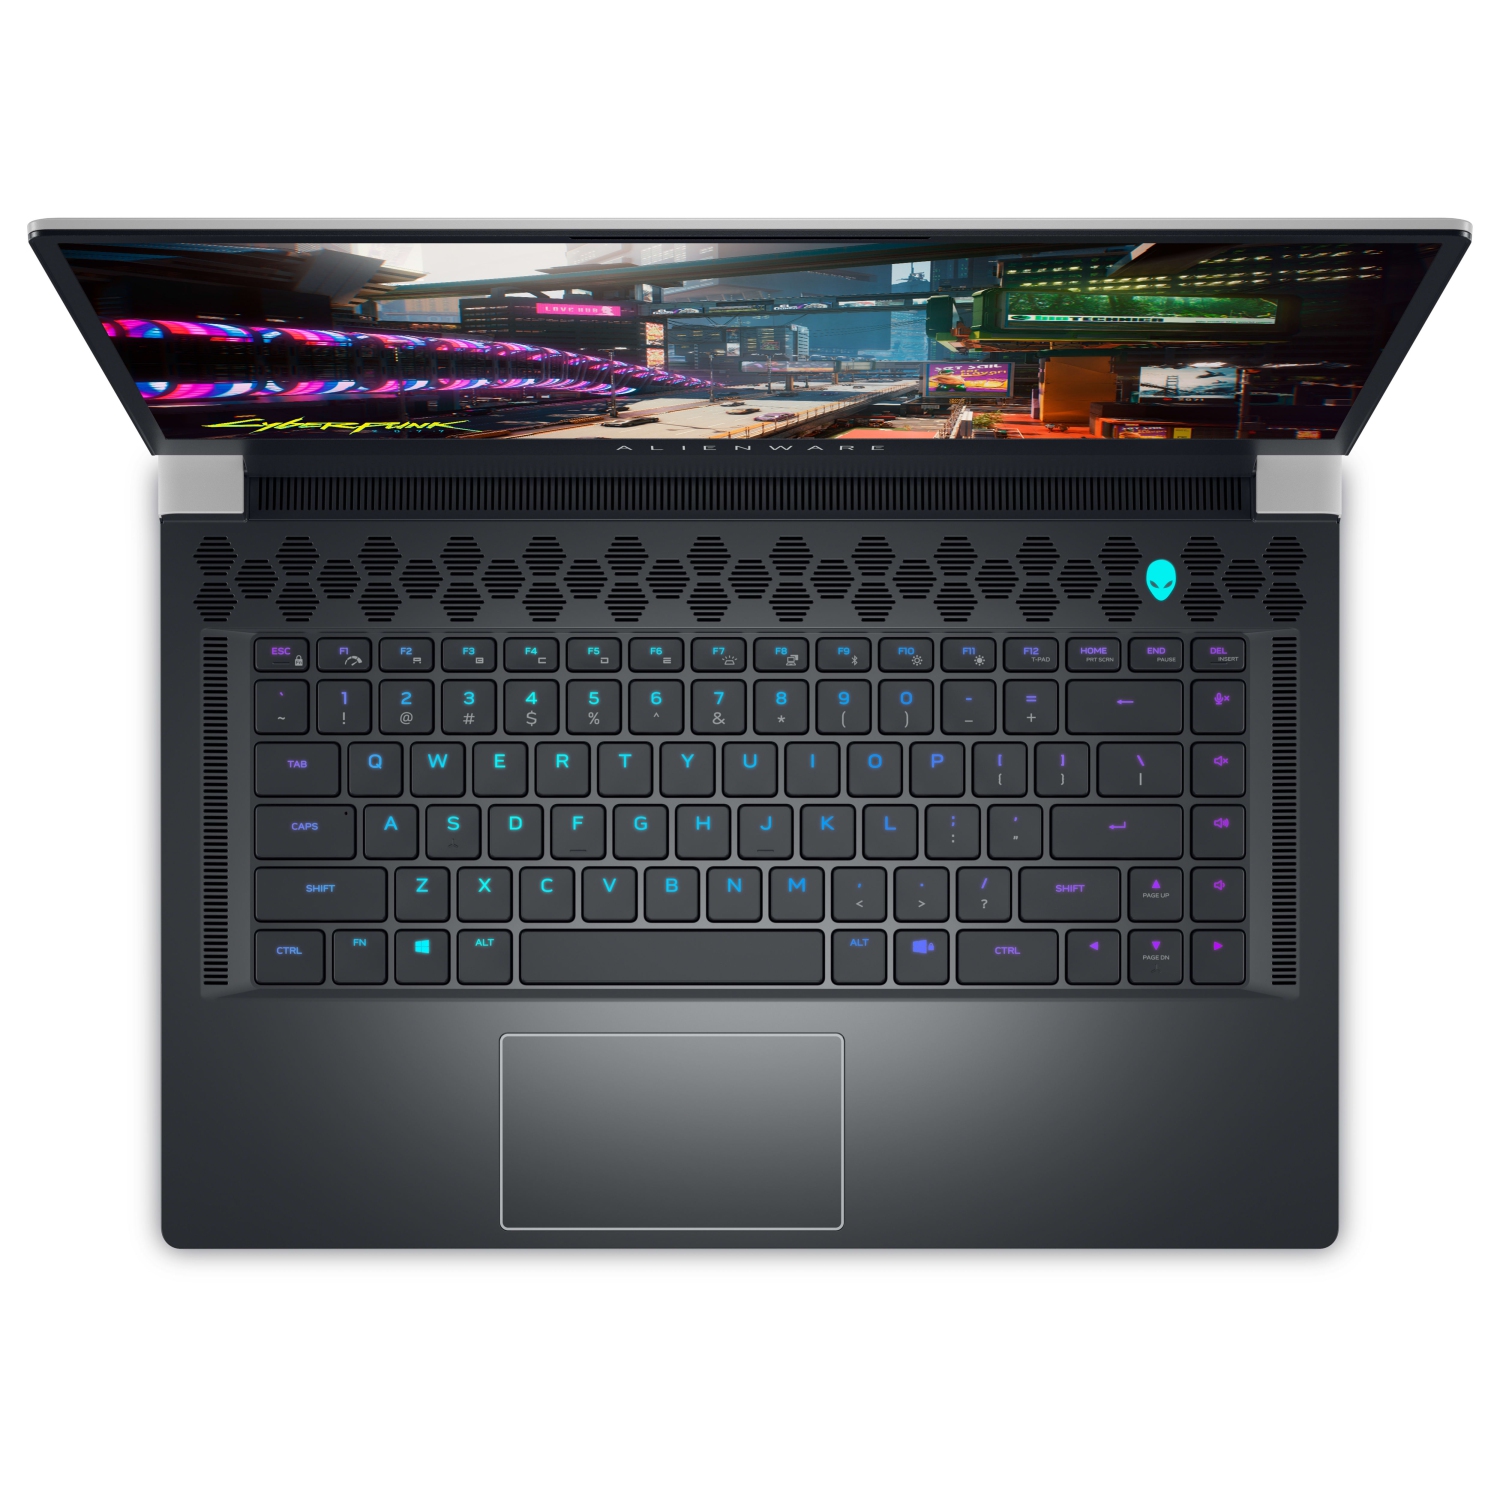 Refurbished (Excellent) – Dell Alienware X15 R2 Gaming Laptop (2022) | 15.6" FHD | Core i7 - 2TB SSD - 16GB RAM - RTX 3060 | 14 Cores @ 4.7 GHz - 12th Gen CPU - 6GB GDDR6